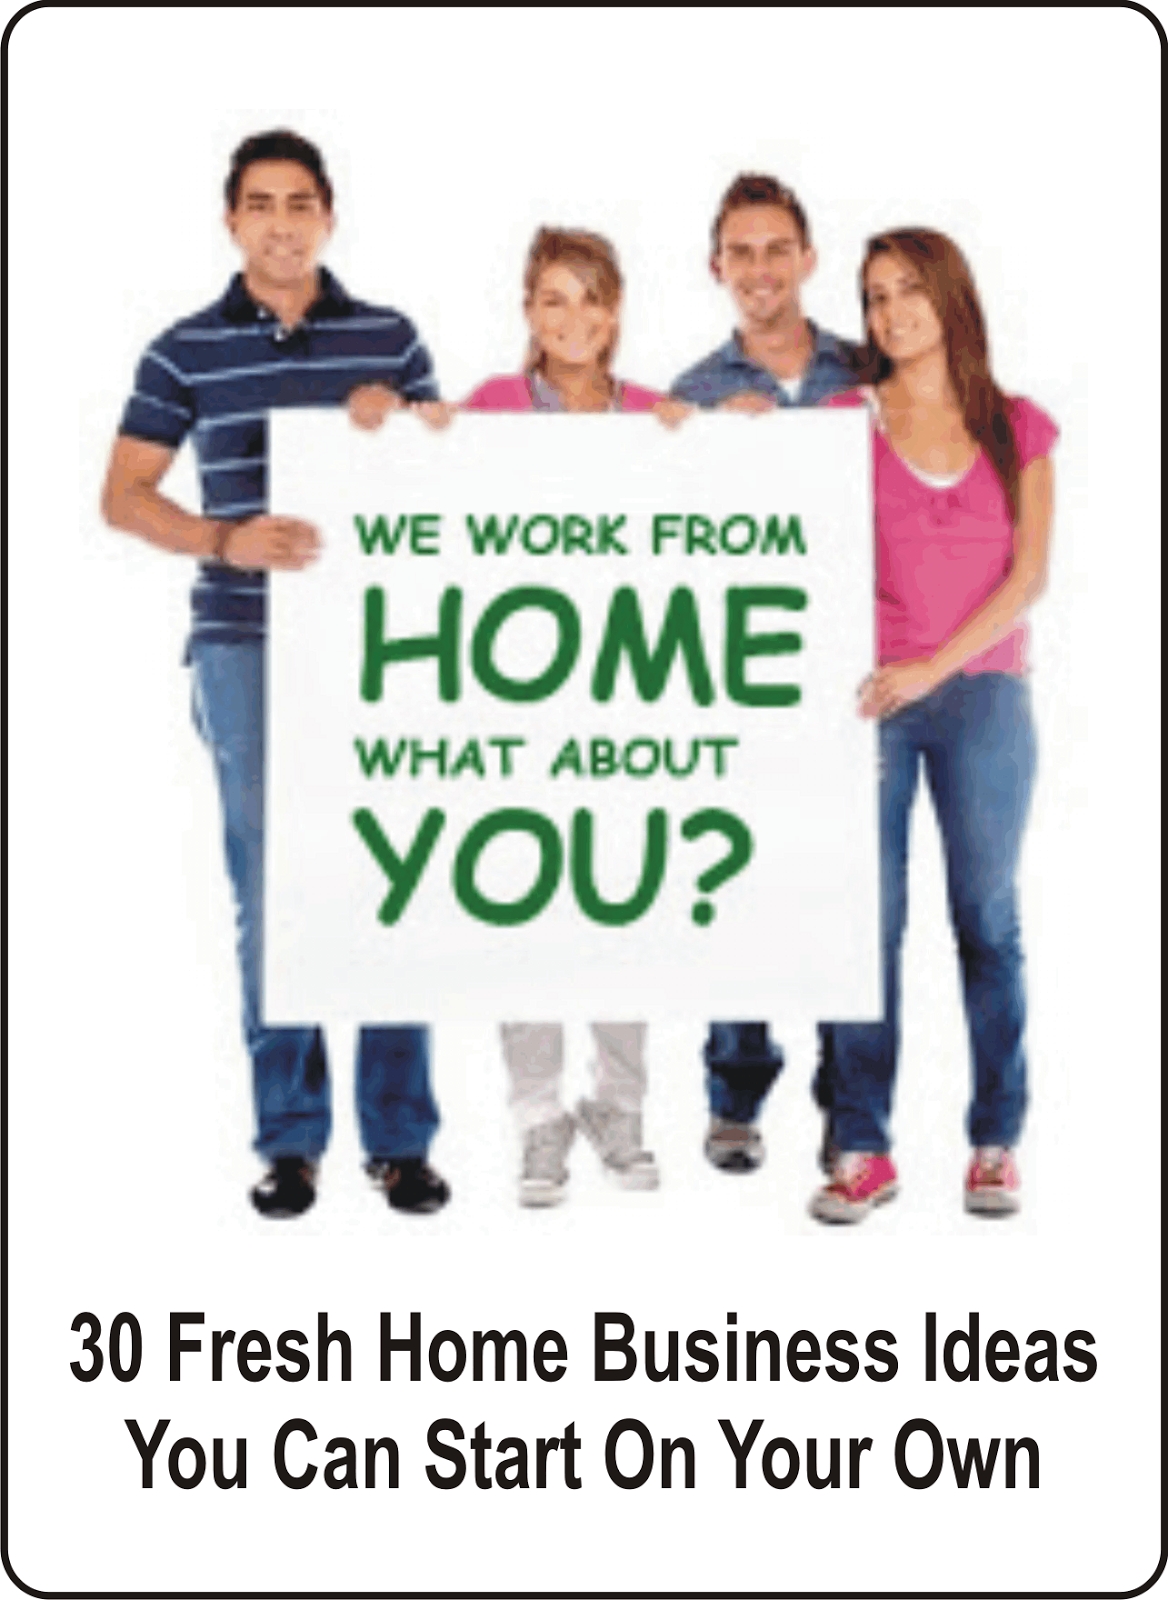 10 Ideal Top Small Business Ideas 2013 vibrant starting own business ideas at home based 2013 click image 2 2022